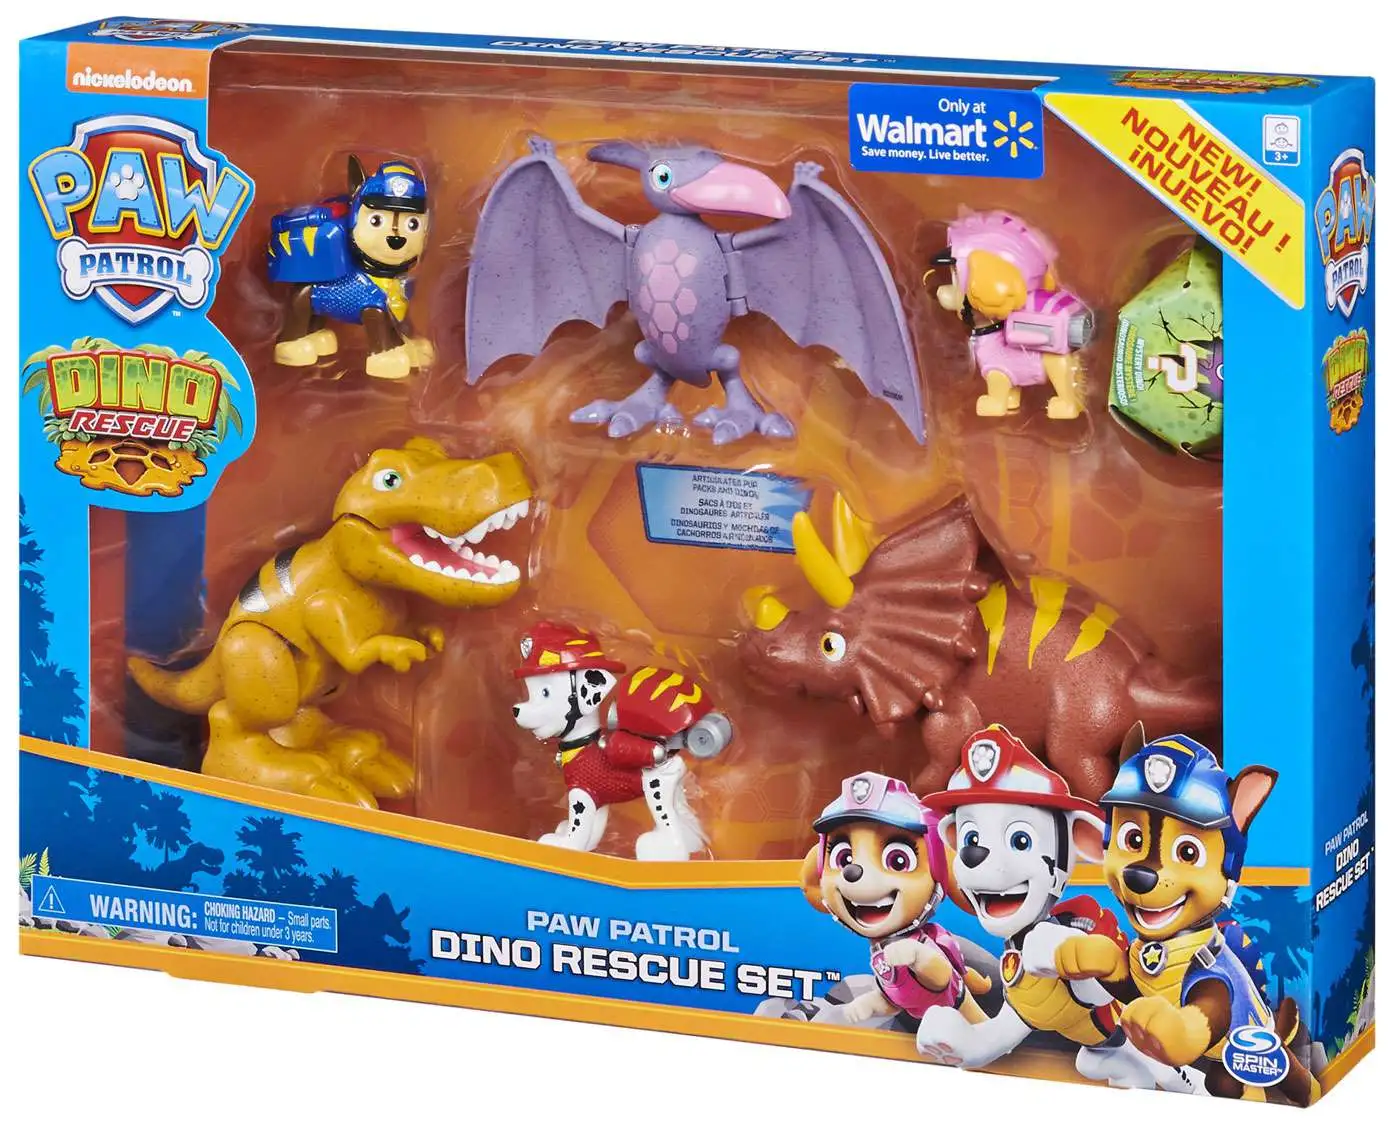 Set of 6 Paw Patrol Dino Rescue Mini Figures Series 7 & 6 Dinosaurs for sale online 